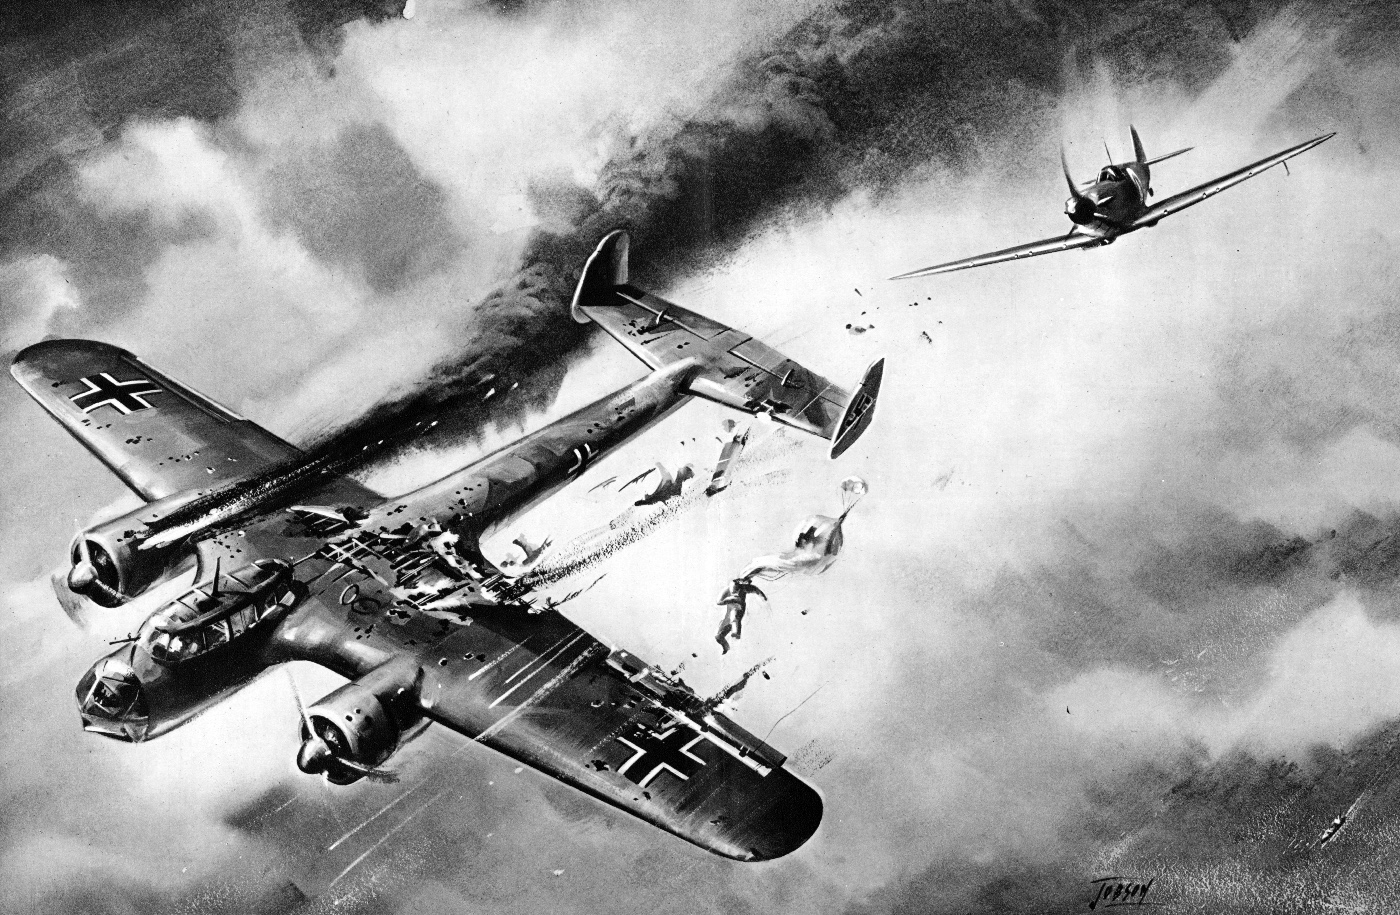 This is a black and white illustration of a German Do 17 bomber being shot down by Royal Air Force Spitfire during the Battle of Britain in 1940.